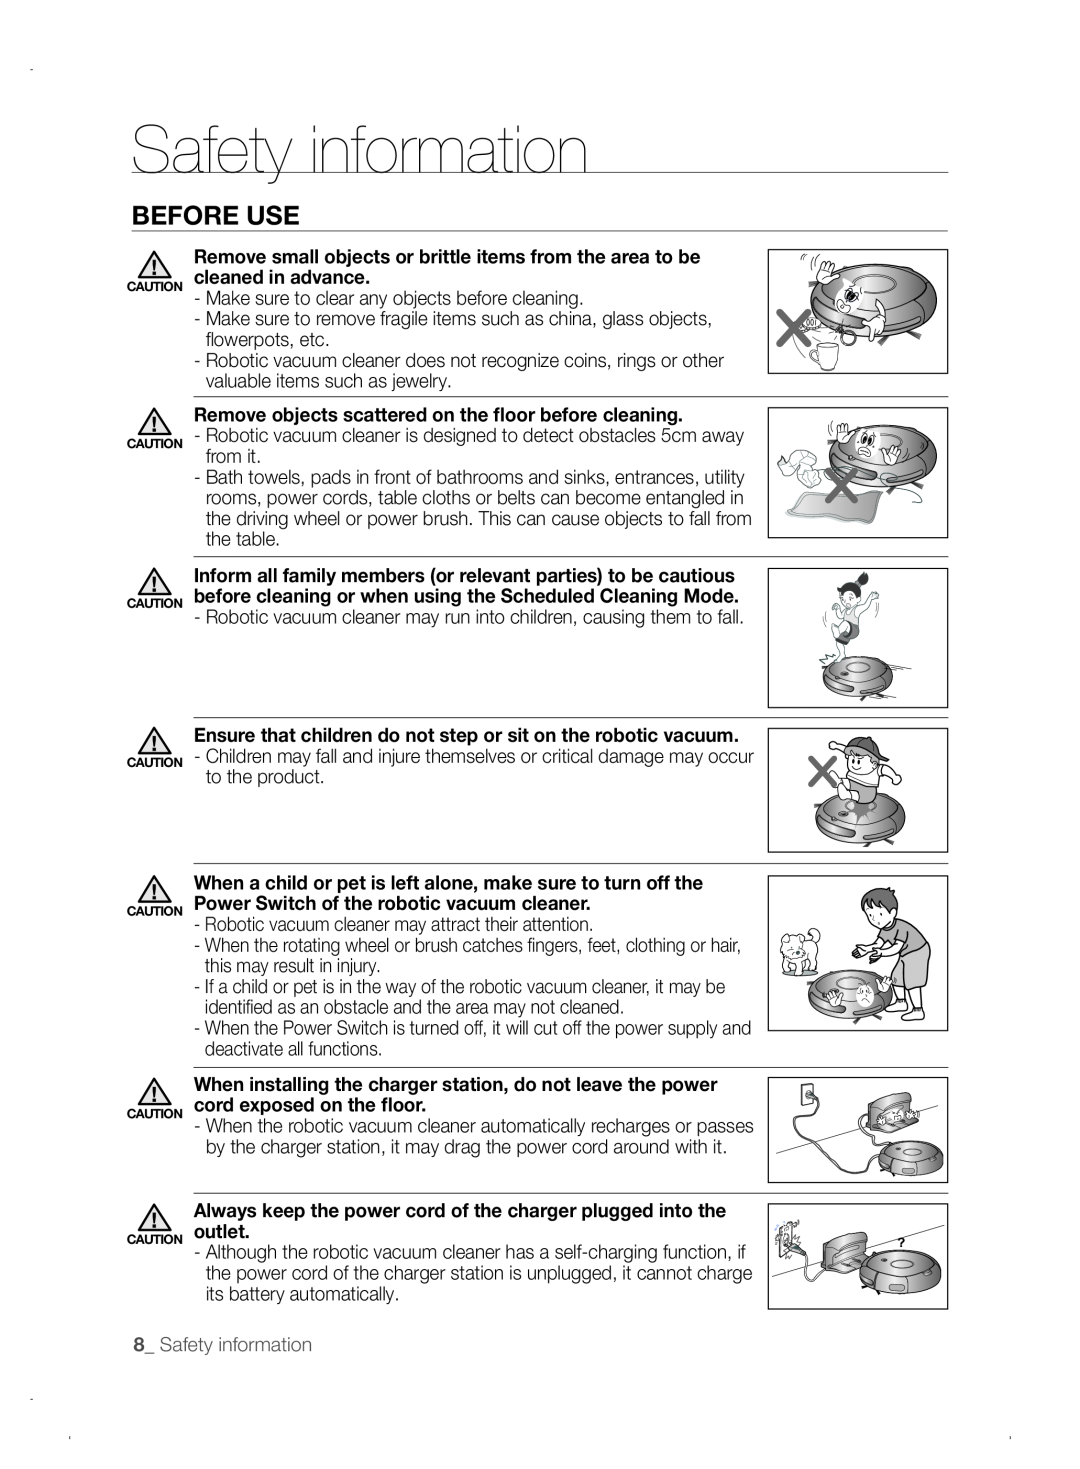 Samsung VCR8845T3A/XEO manual Before use, Safety information, Remove objects scattered on the floor before cleaning 